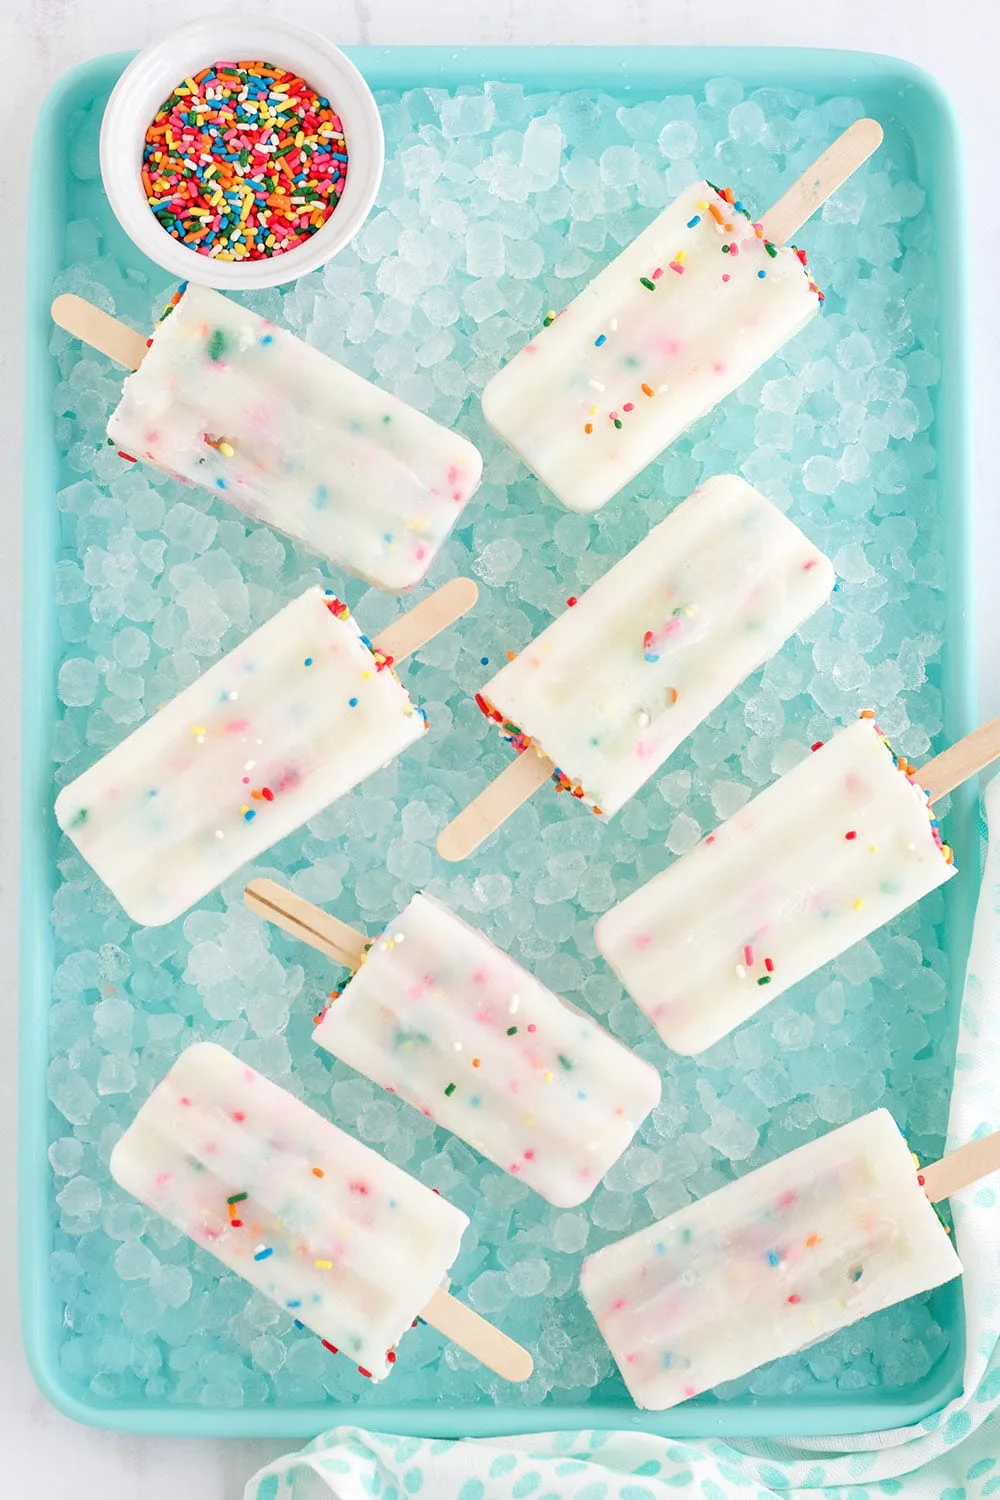 Several cake mix pops on a bed of ice in a blue tray.